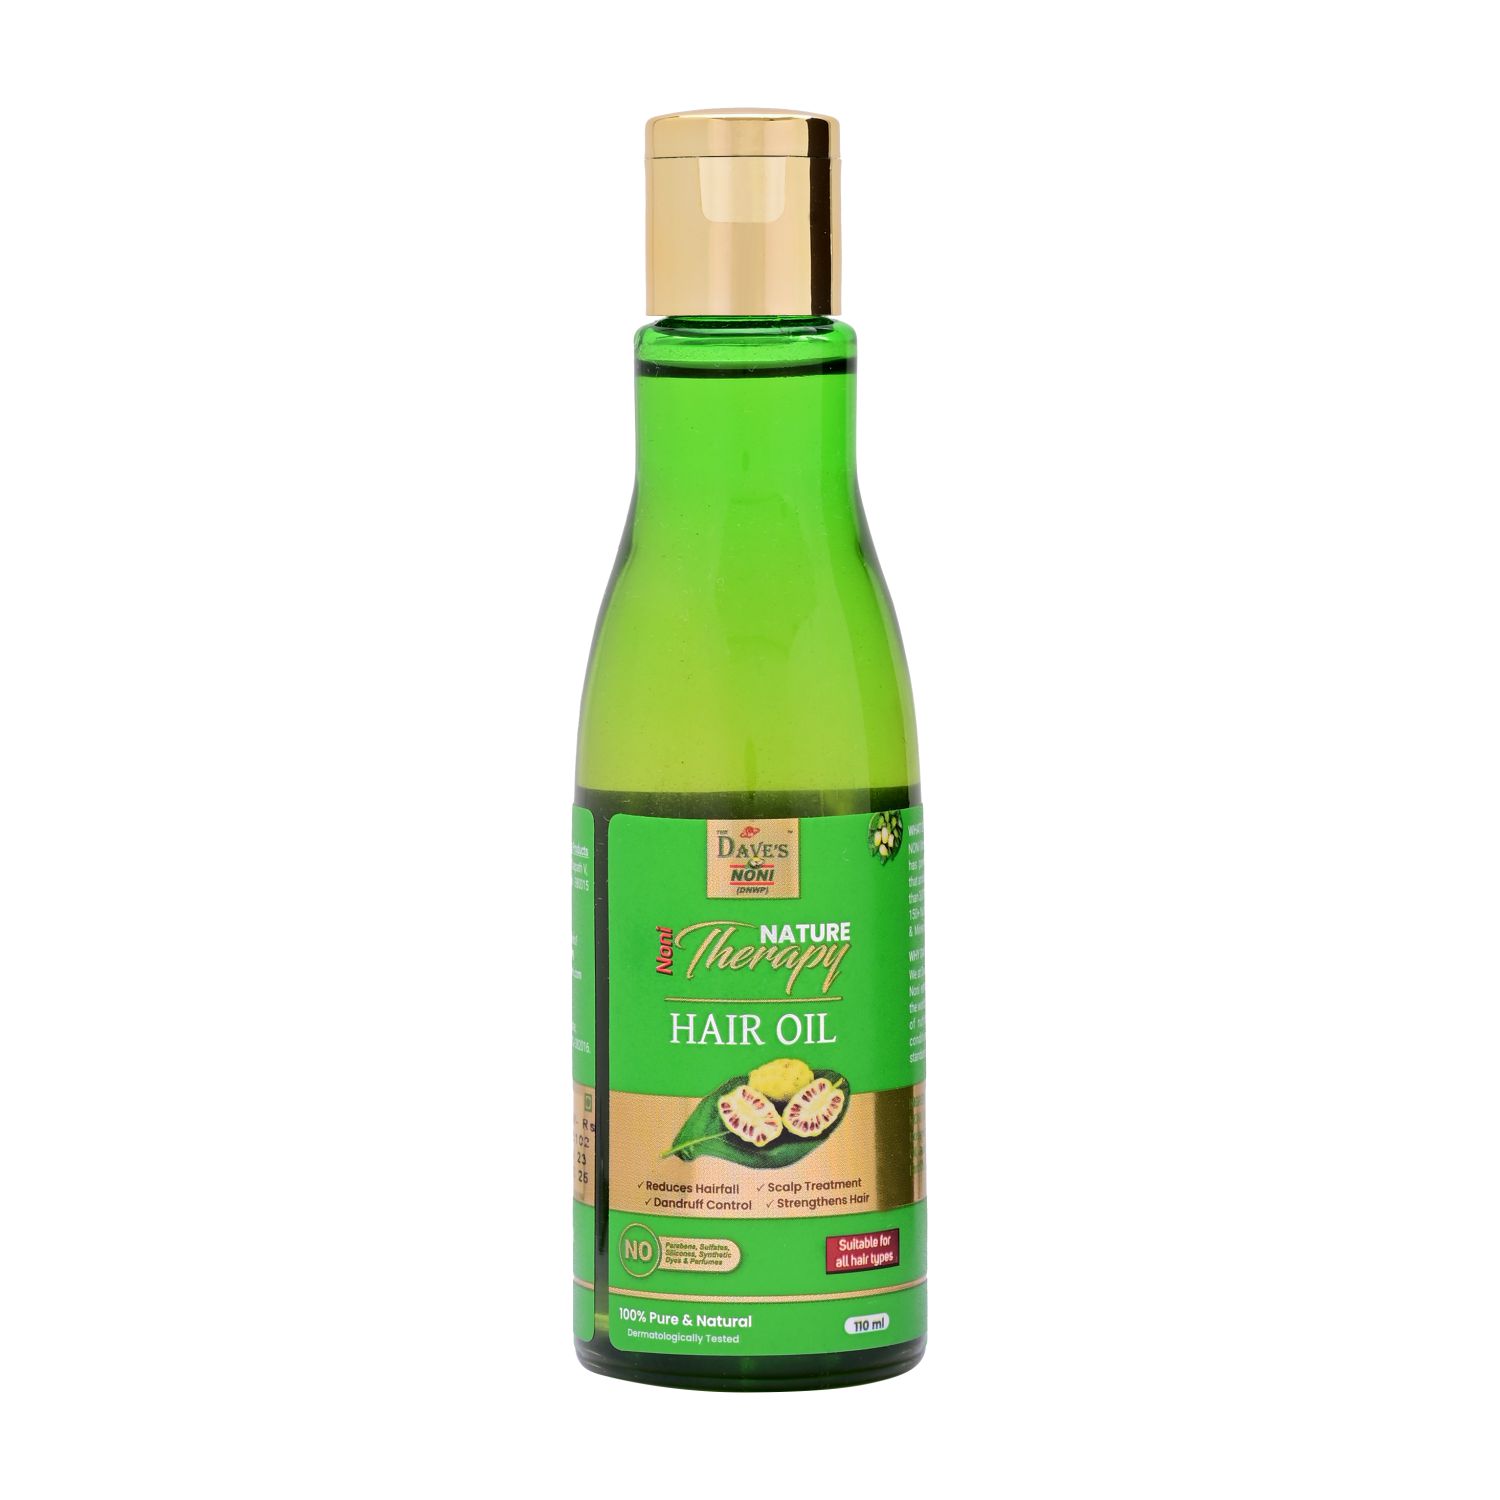 The dave's noni pure & natural nature therapy hair oil -110ml